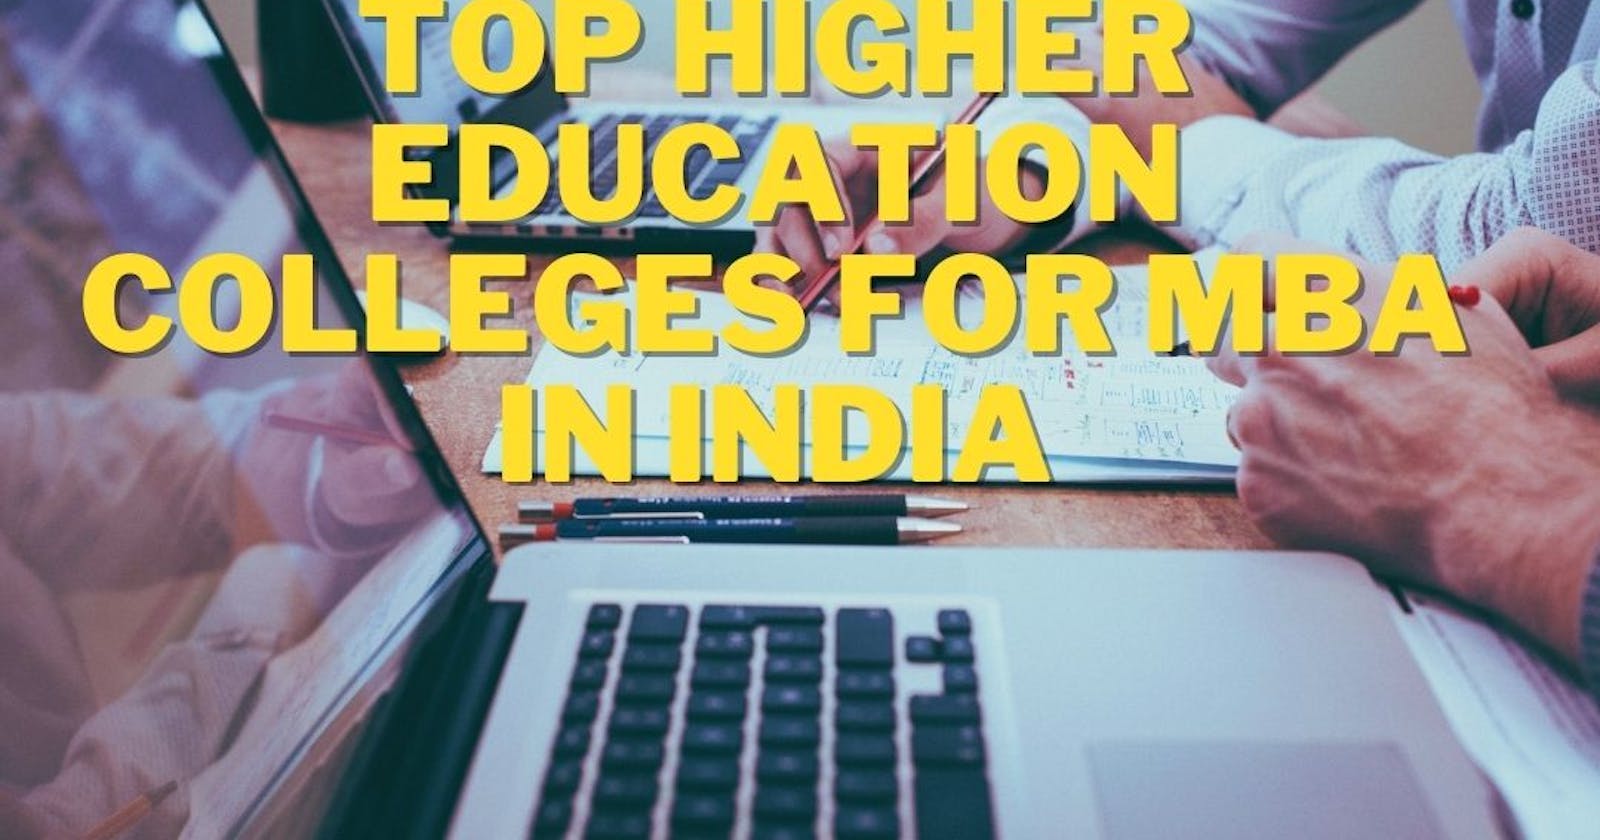 Top Higher Education Colleges For MBA in India